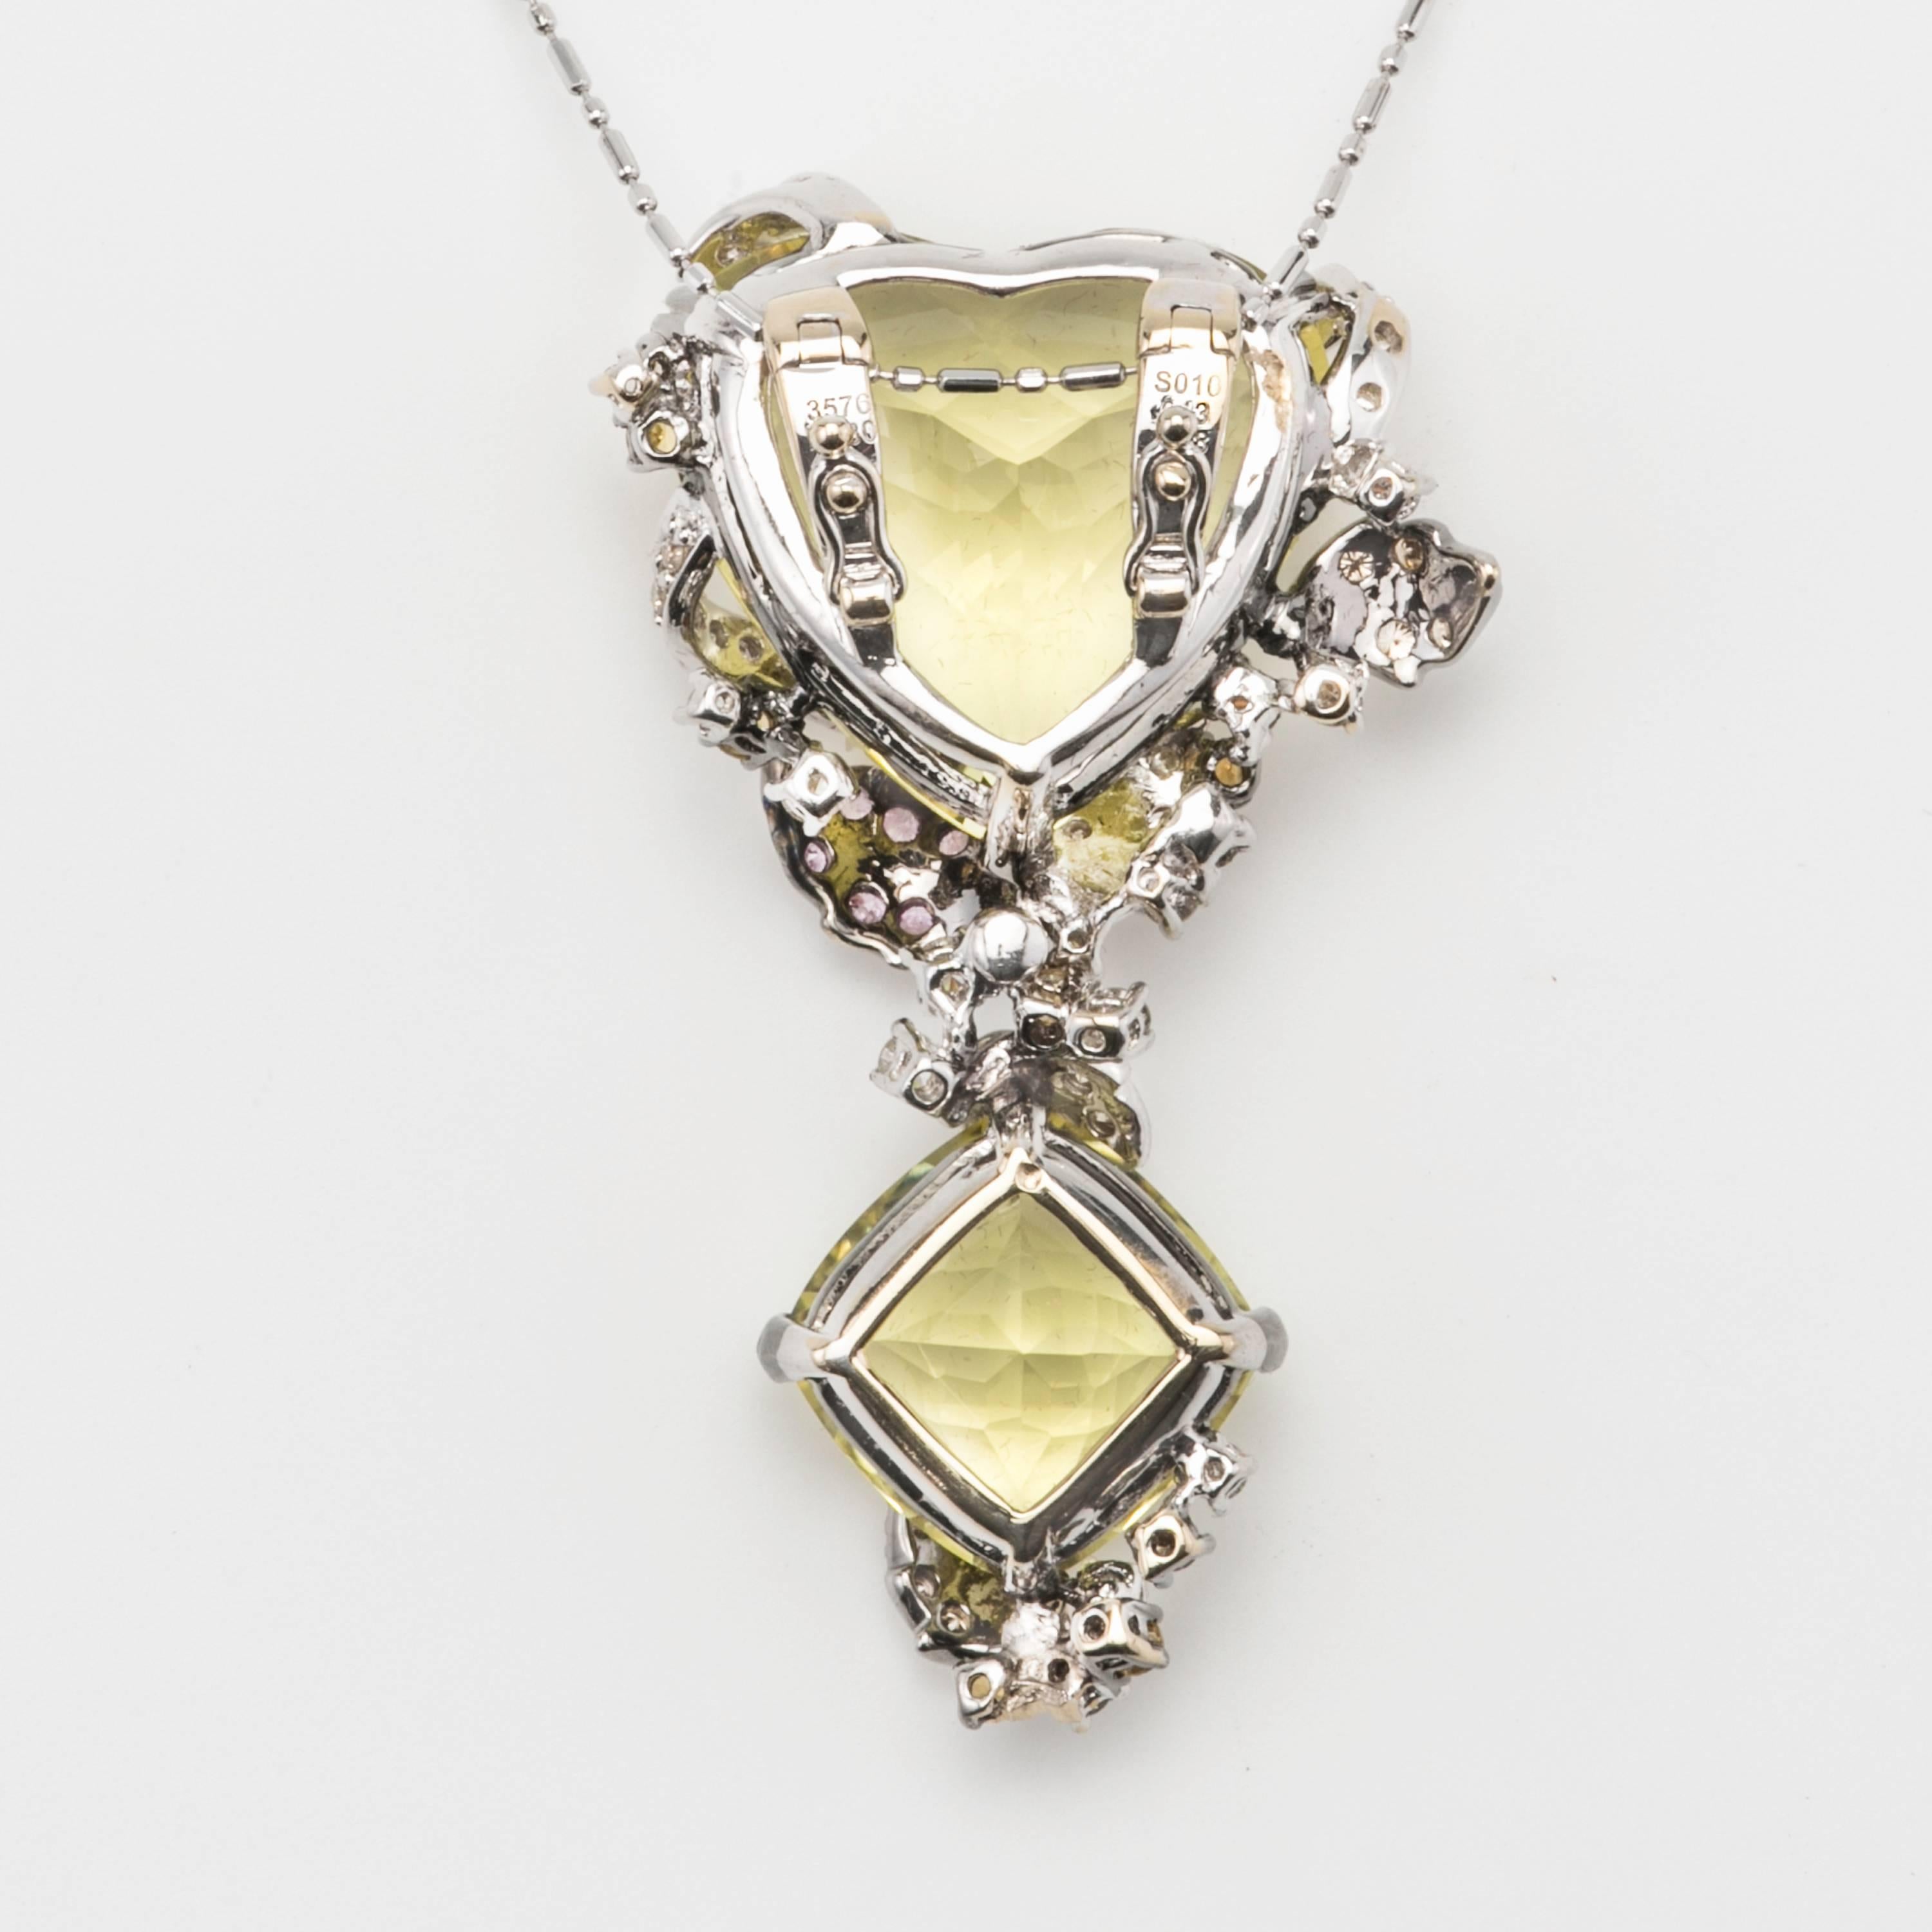 Dazzling huge two piece lime quarts on 18k white gold mount, surrounded by diamonds and pink sapphires.  Pendant hangs on a 14k sparkling white gold 24” chain.
Lime quartz 35.76 ct.
Pink sapphire 0.10
Diamond. 0.80
Total weight. 16.2 gm


